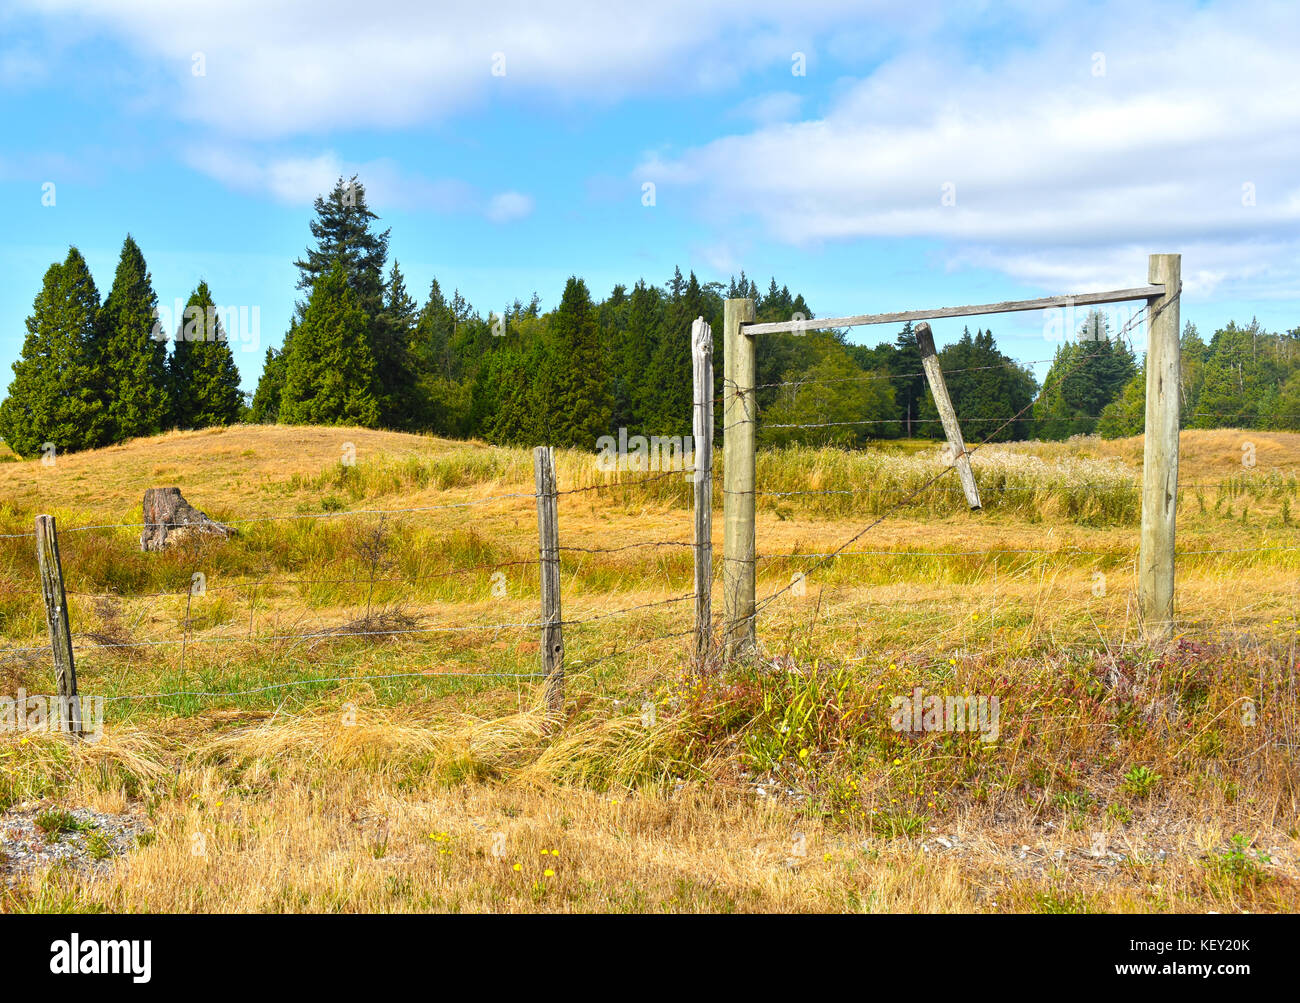 A beautiful pasture with a barb wire fence in the foreground with evergreen trees in background under a cloudy blue sky.  Dried grasses from drought. Stock Photo